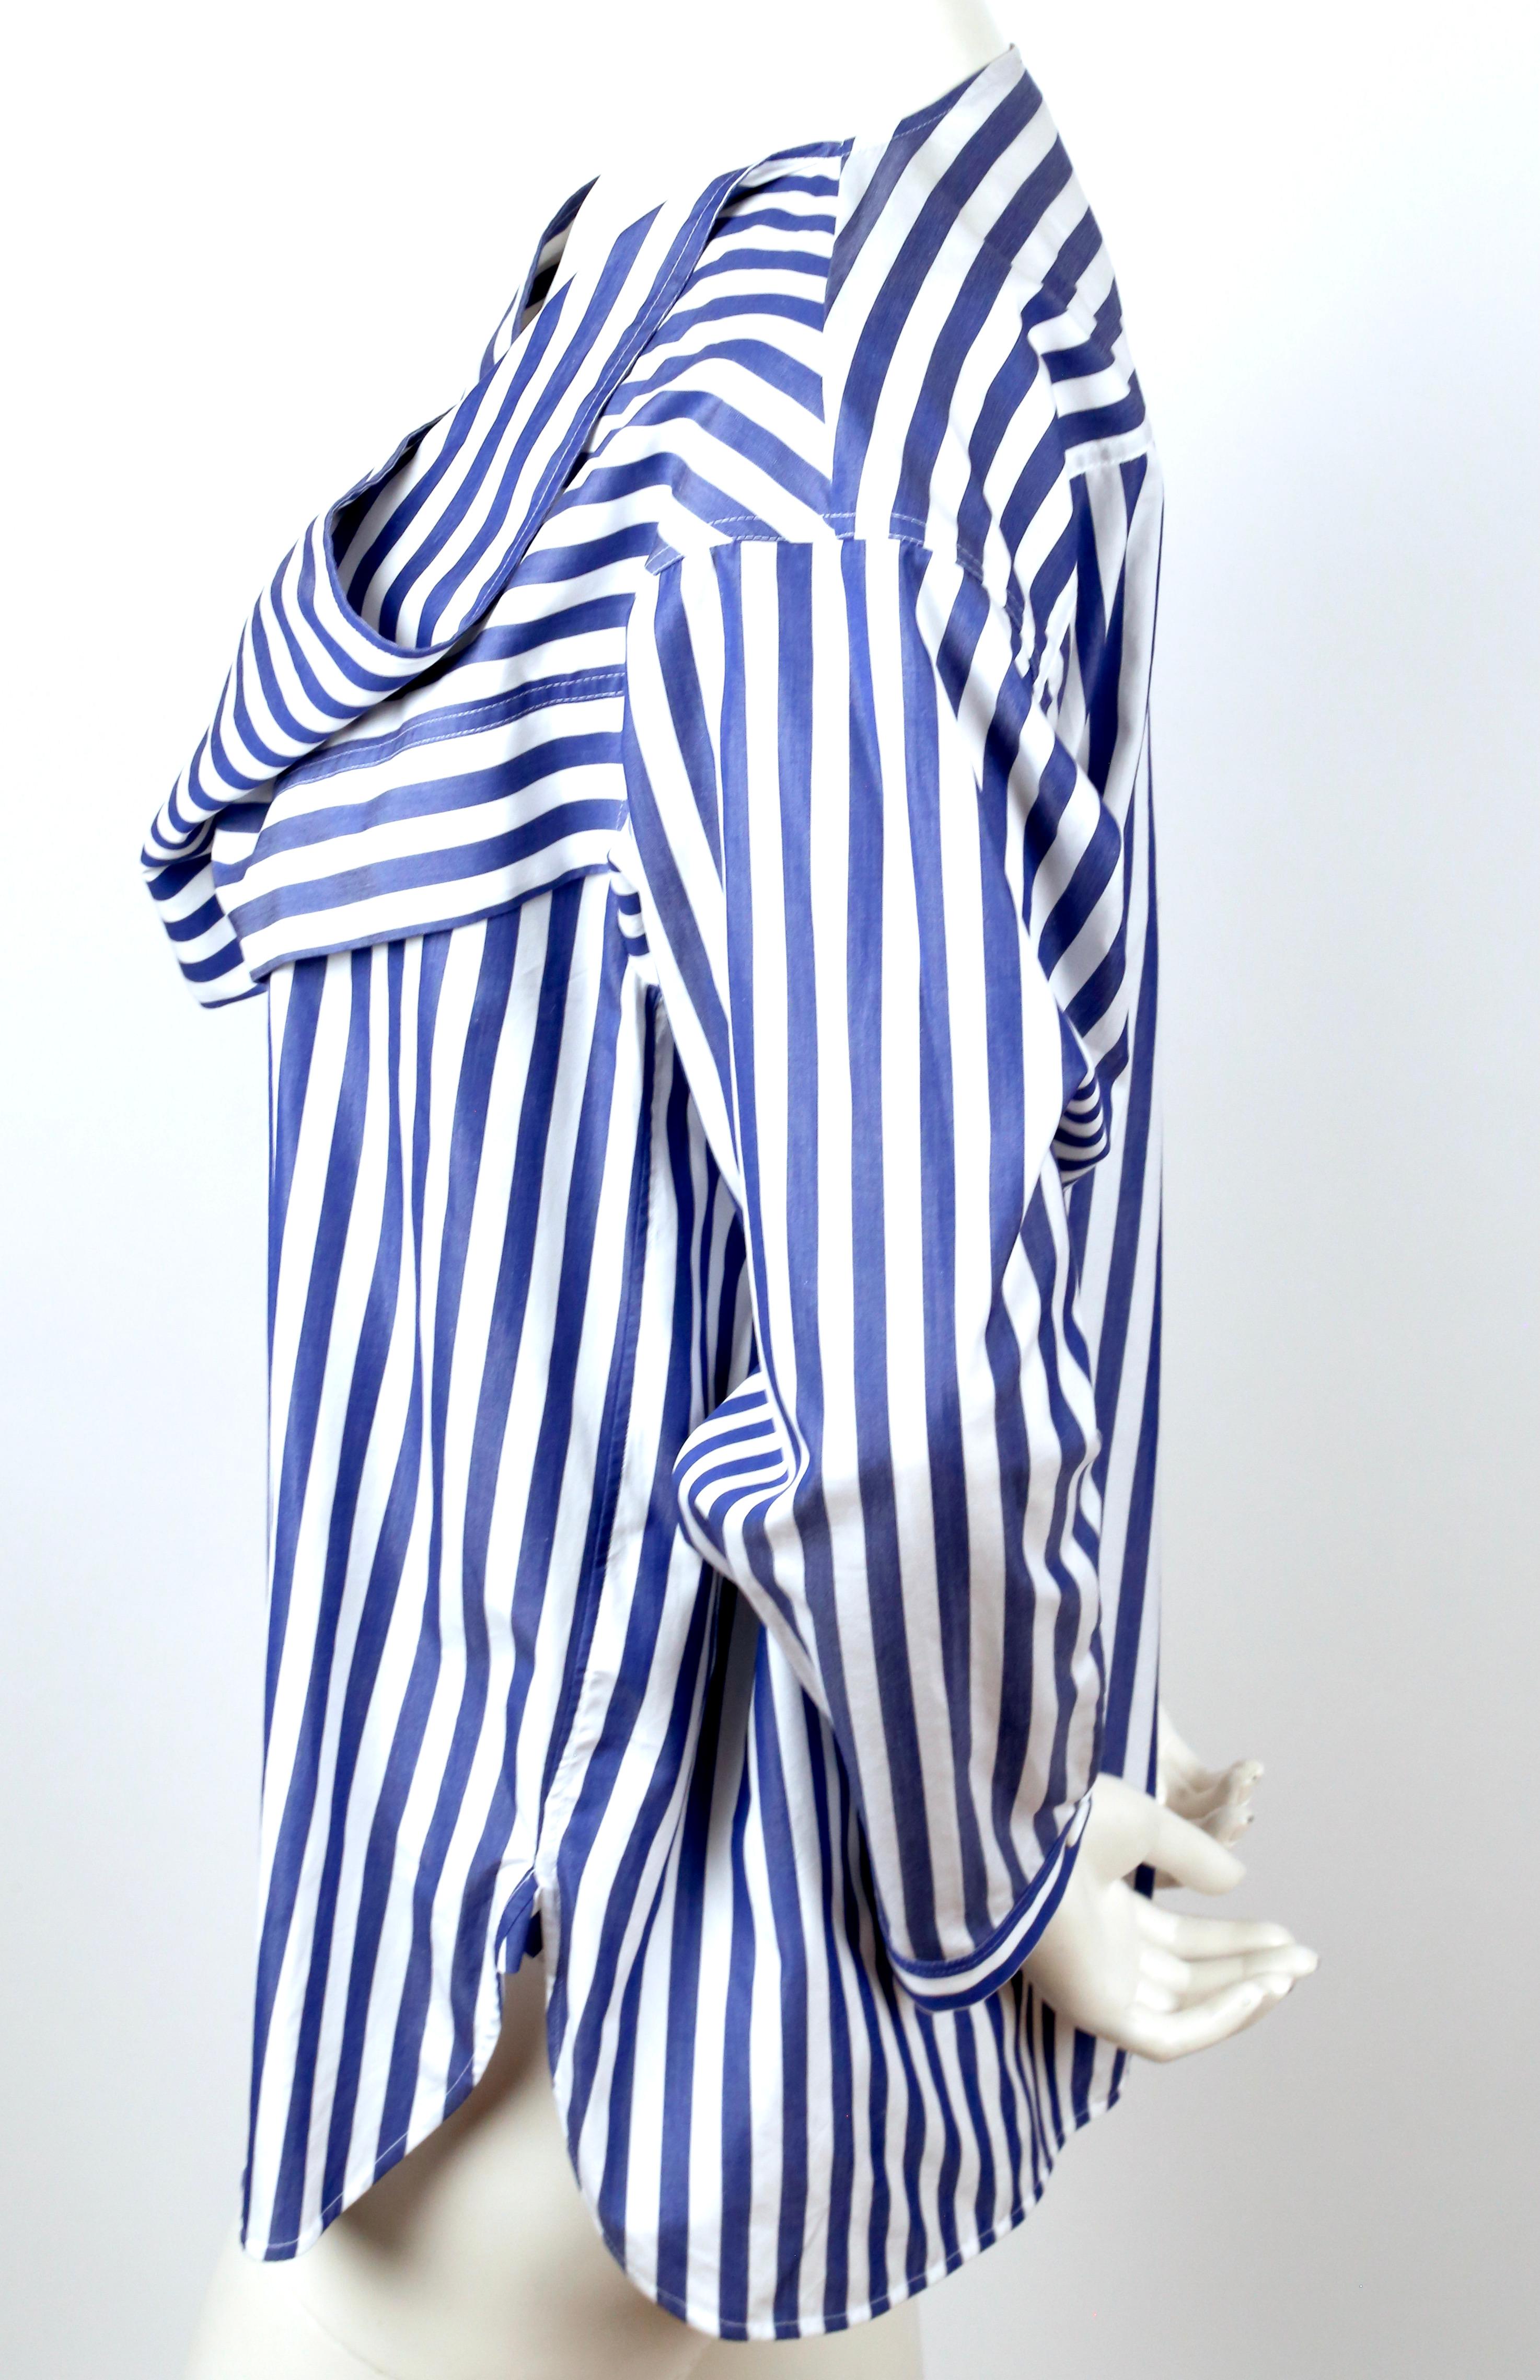 Draped, cotton poplin blouse with blue stripes designed by Phoebe Philo as seen for resort 2016. This piece features a drape at the chest, long sleeves and a relaxed fit.  French size 38. Fabric content: 100% cotton. Made in Madagascar. Excellent